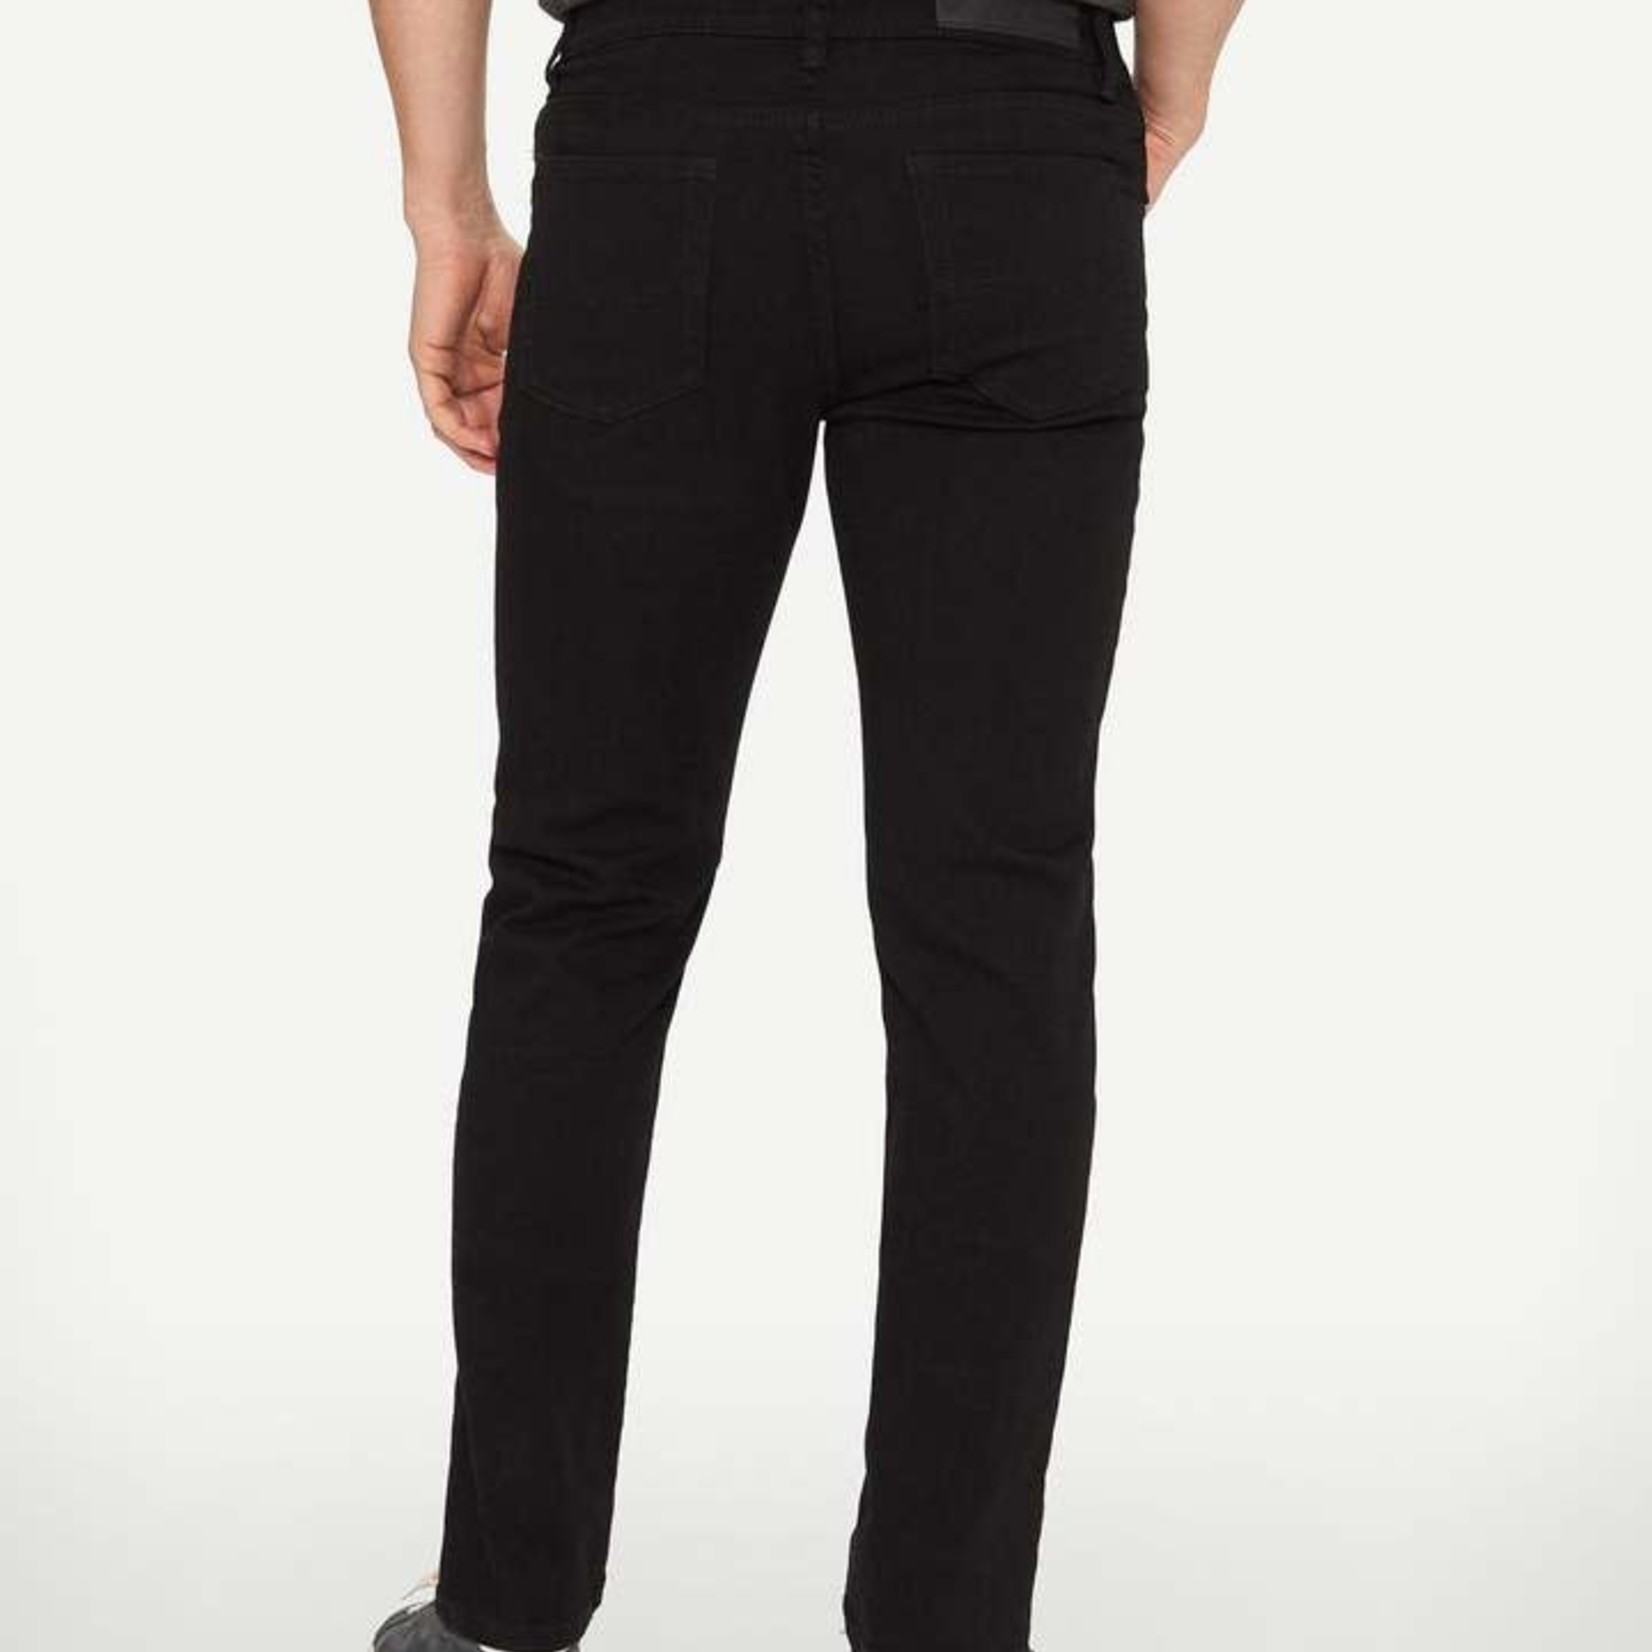 Lois Jeans Canada The "Peter Slim 7400" by Lois Jeans